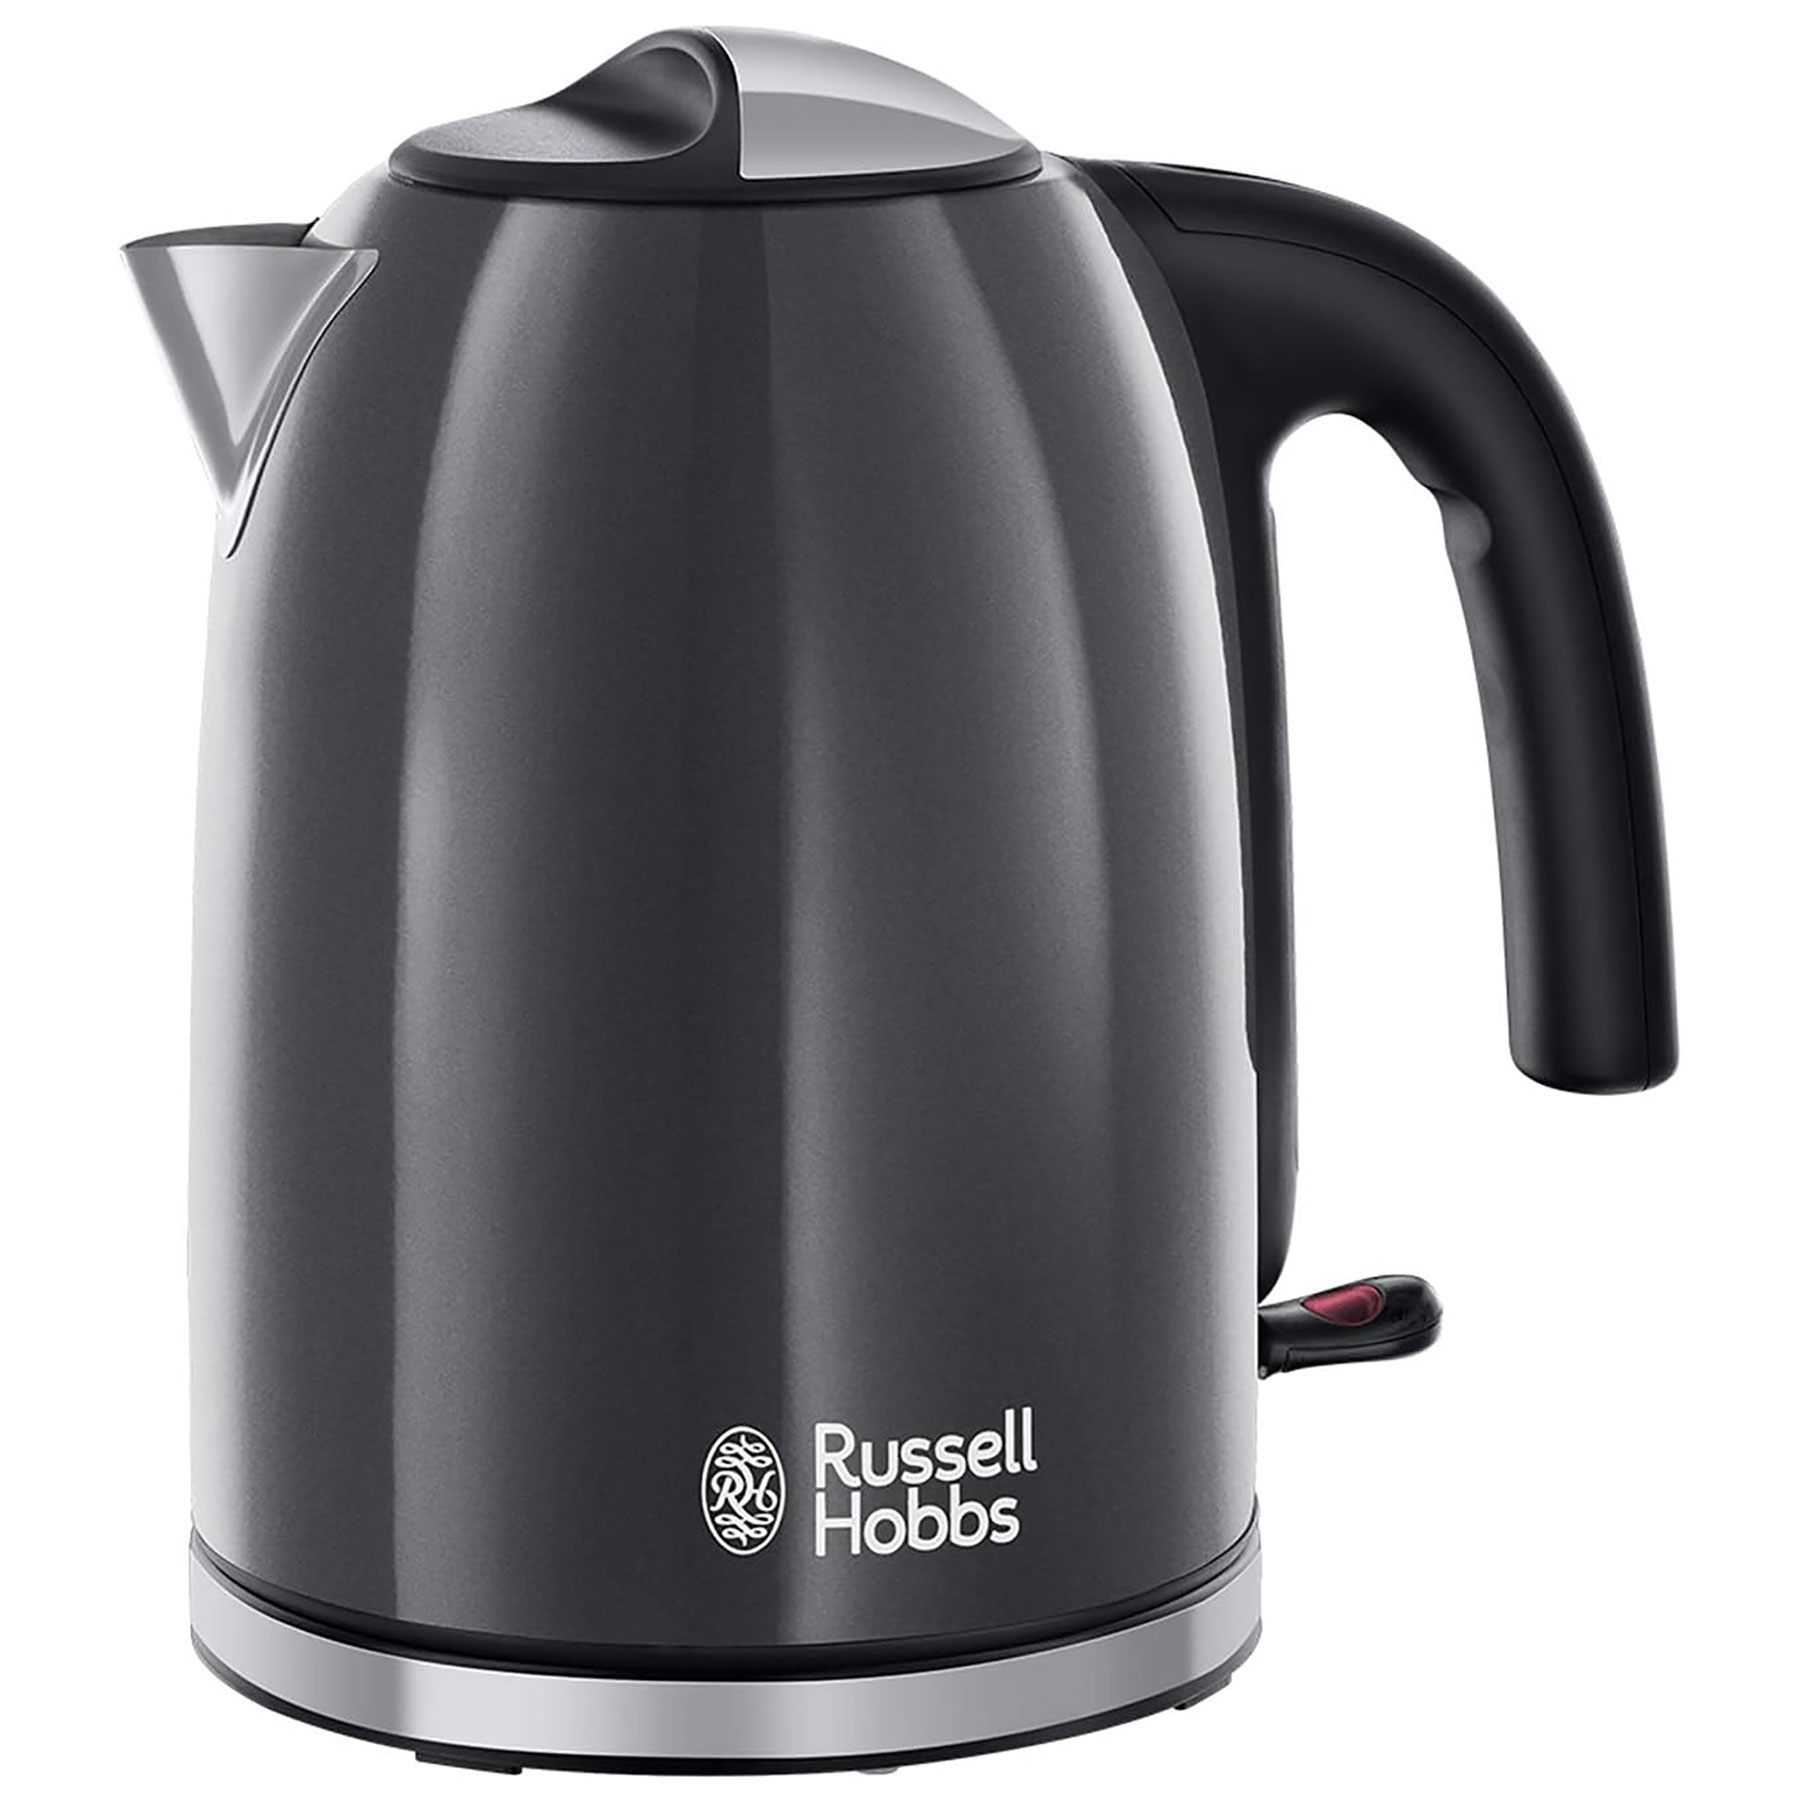 Image of Russell Hobbs 20414 Colours Plus Jug Kettle in Grey 1 7L